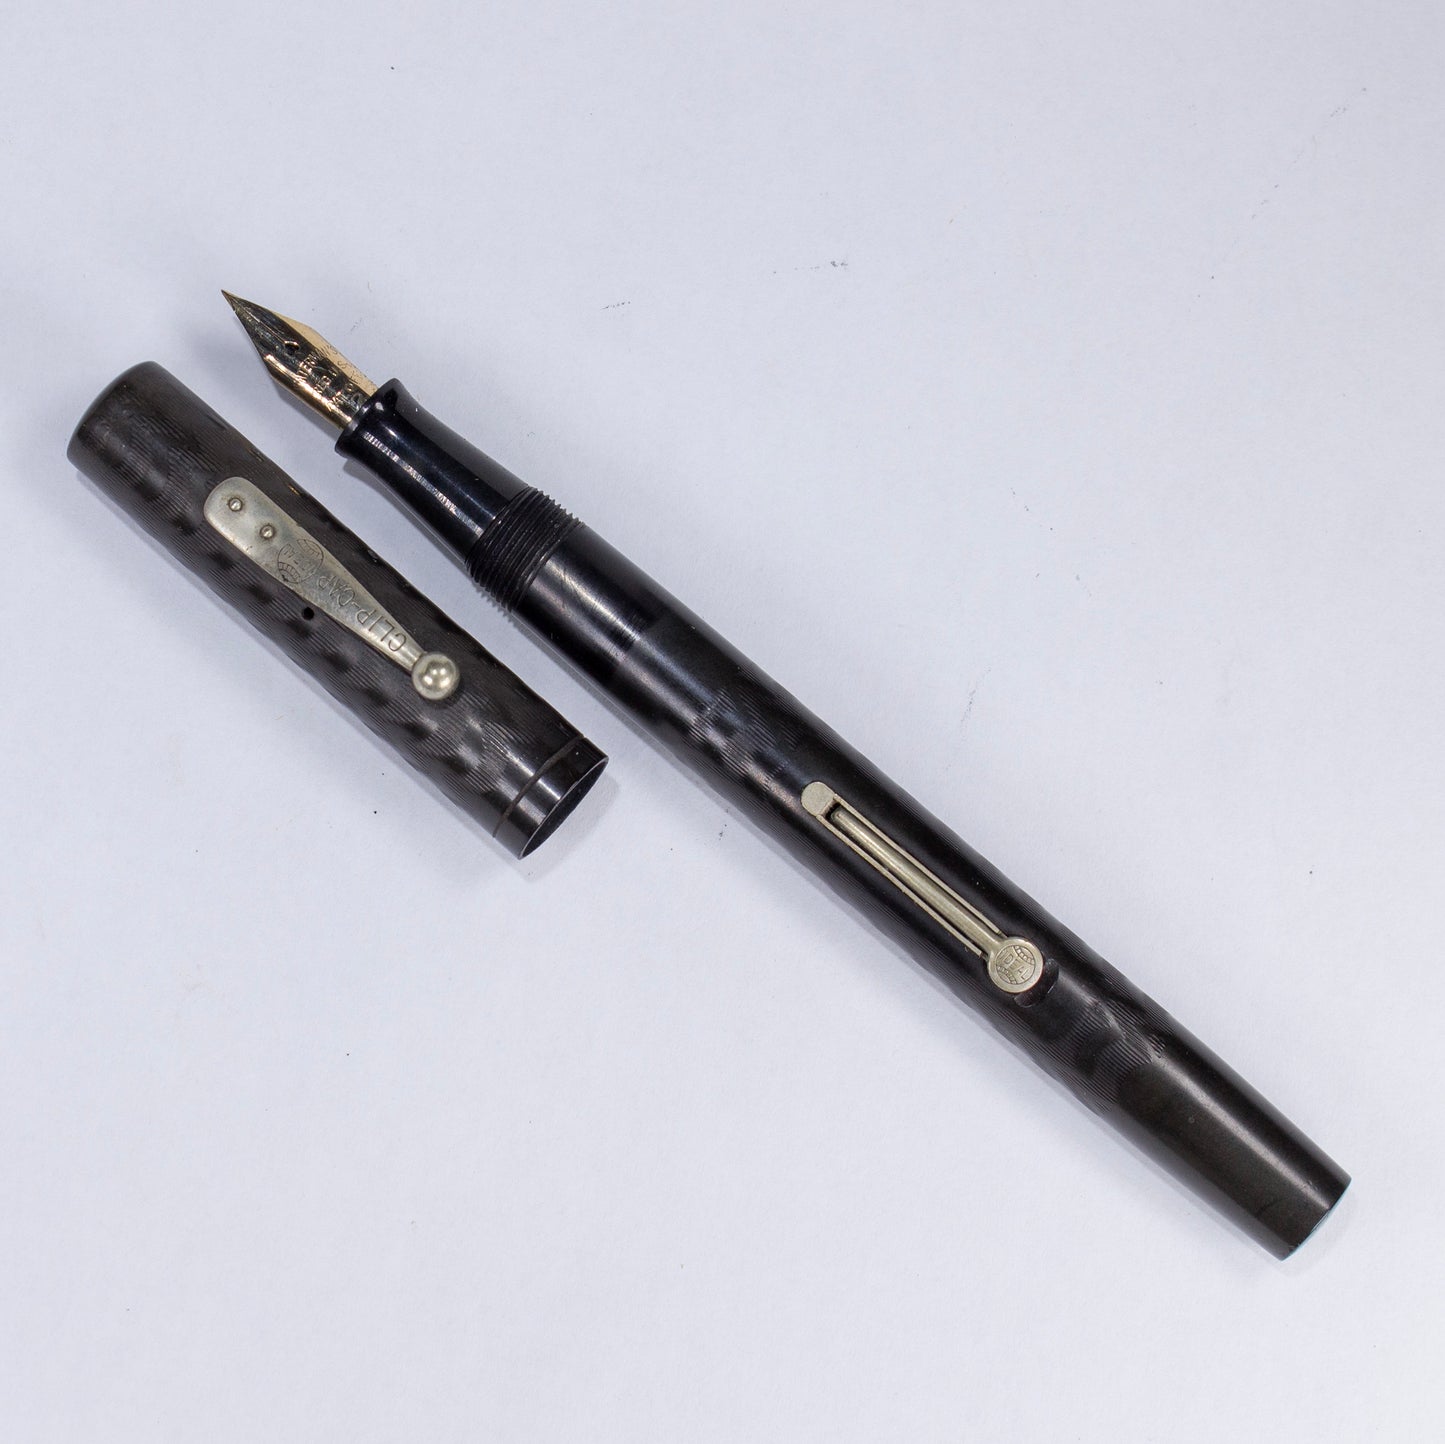 ${titleName/Type: Waterman 52 Manufacture Year: 1920s Length: 5 1/2 Filling System: Lever Filler, restored with new sac Color/Pattern: Black hard rubber, with very strong chasing and imprints. Nib Type/Condition and remarks: Waterman #2 responsive semi-fl